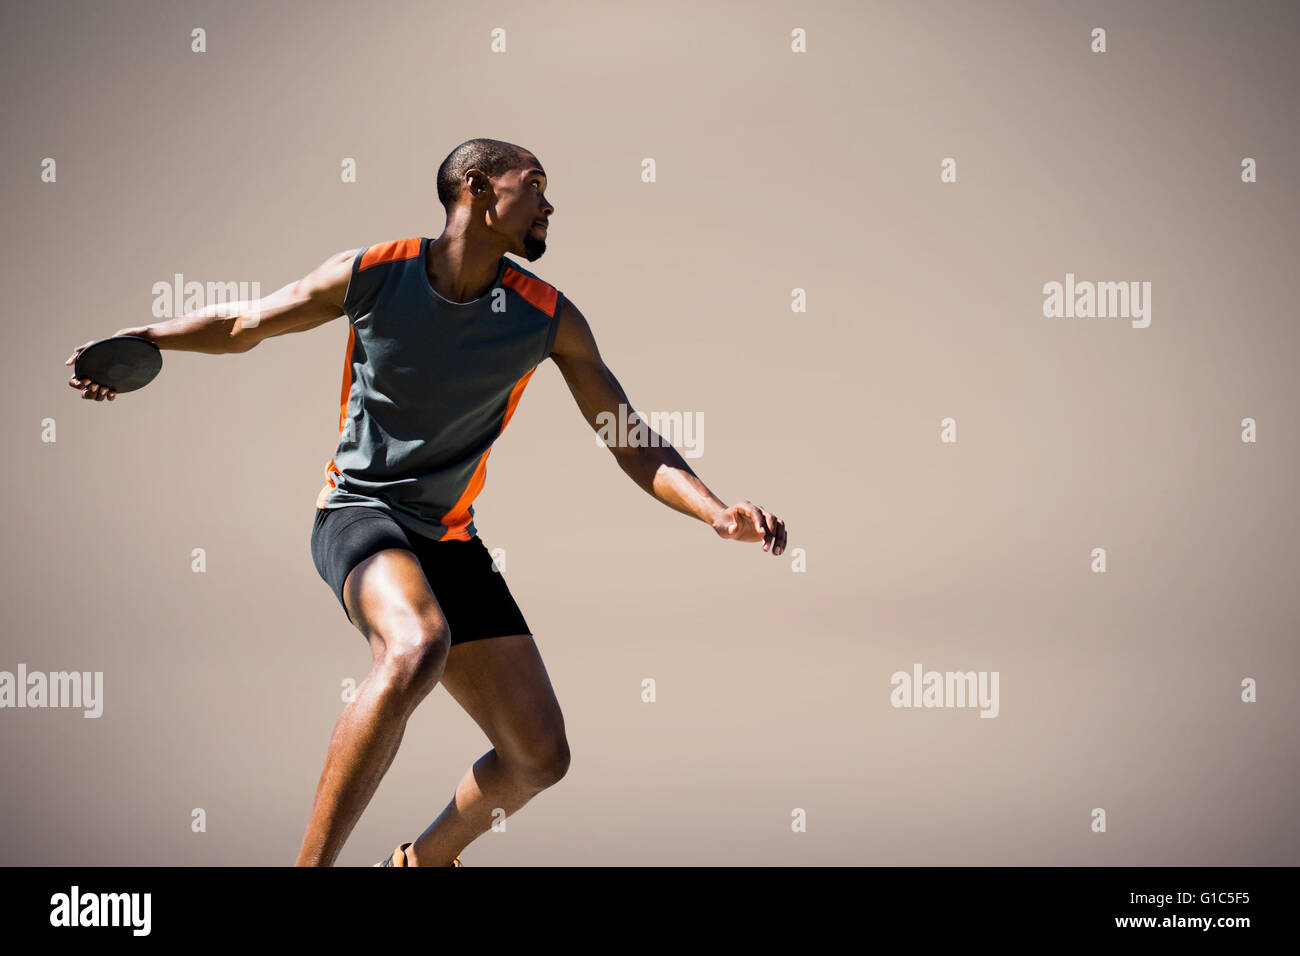 Composite image of athlete man throwing a discus Stock Photo